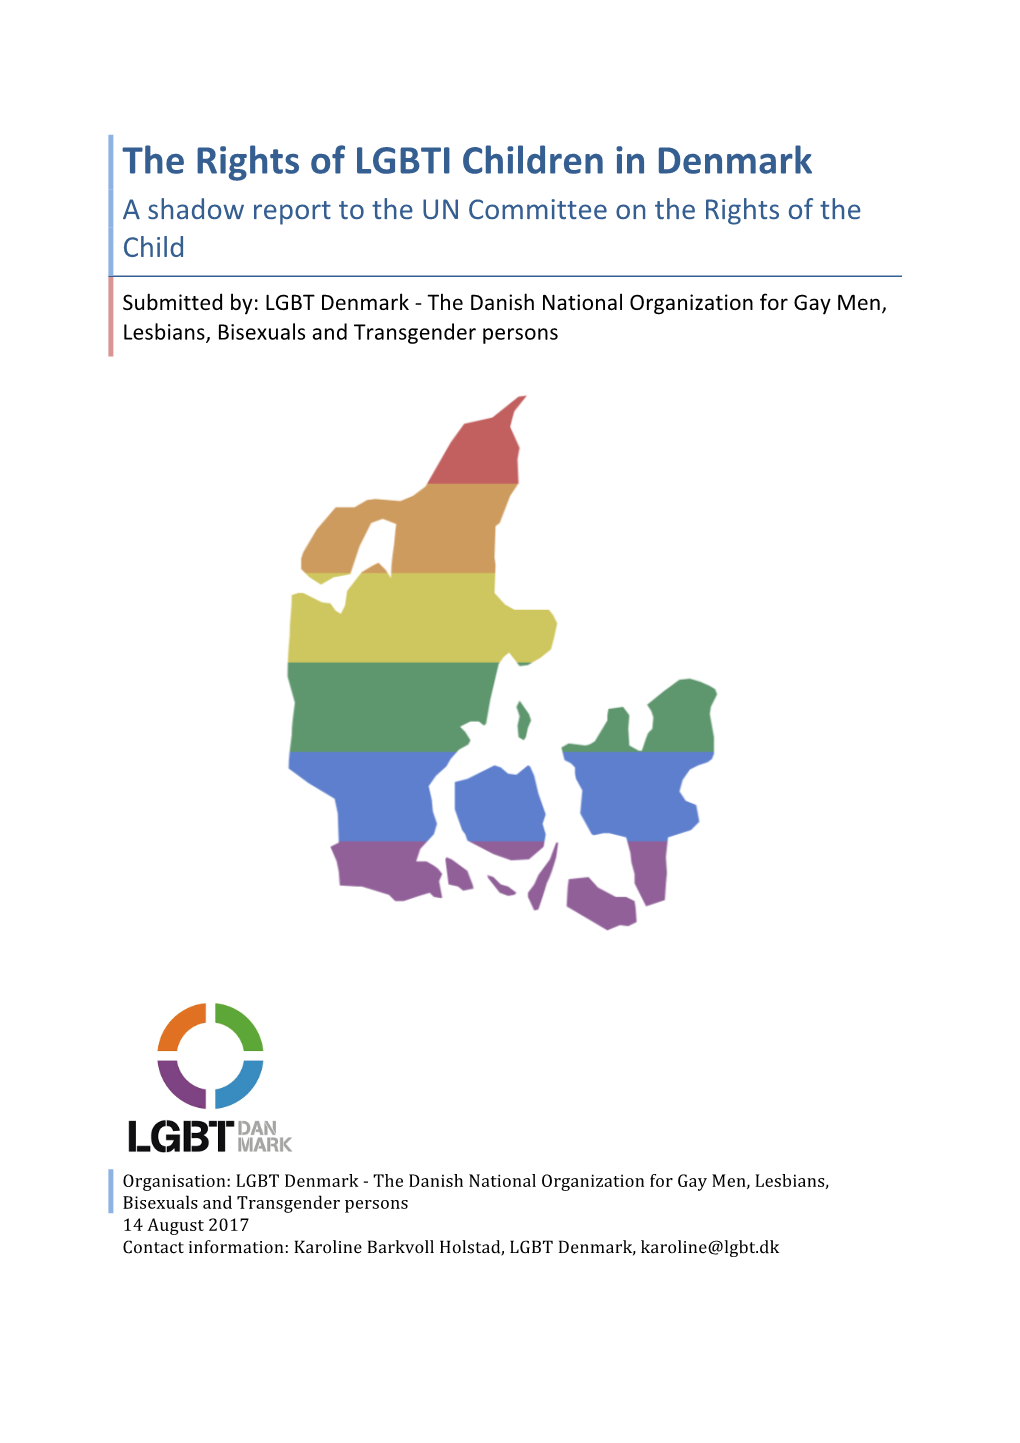 The Rights of LGBTI Children in Denmark a Shadow Report to the UN Committee on the Rights of the Child